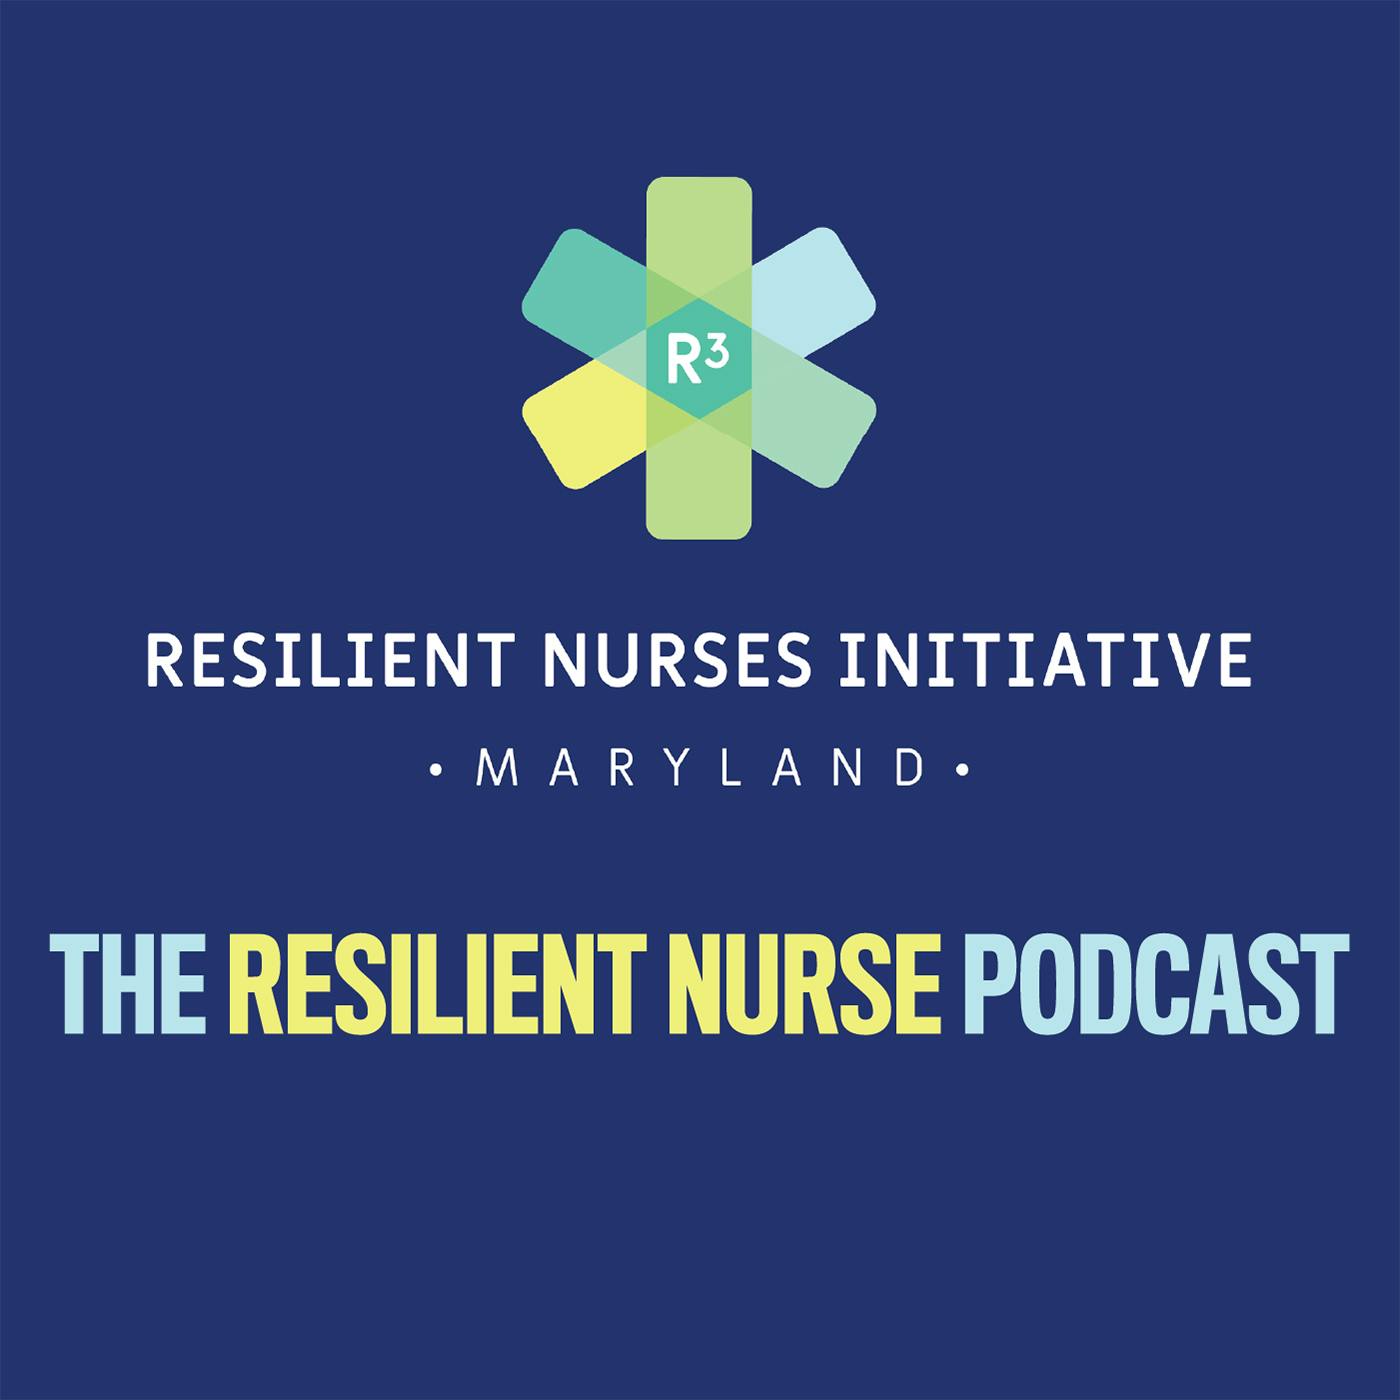 The Resilient Nurse, Episode 7: Nursing’s Opportunity Is Now